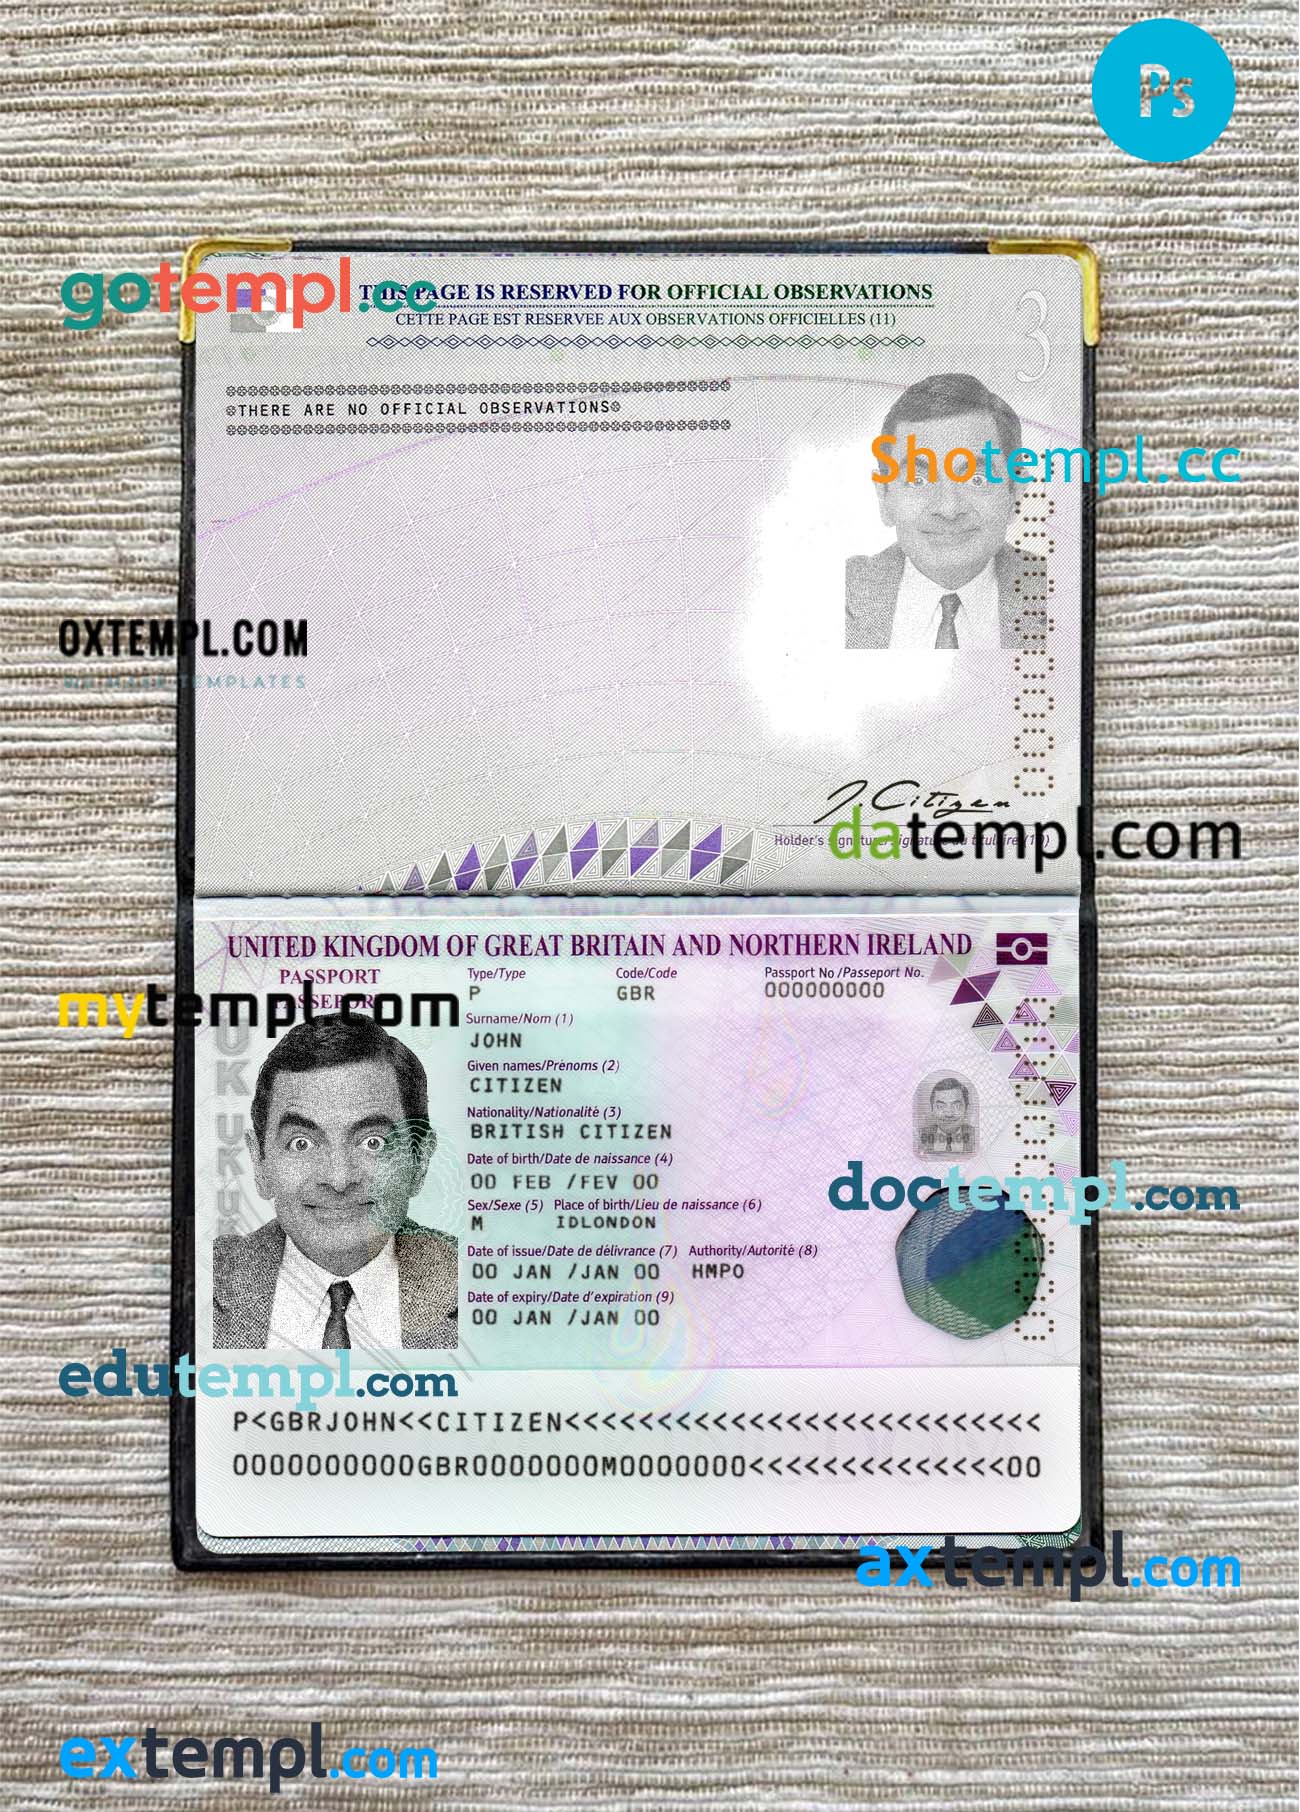 Syria vital record death certificate Word and PDF template